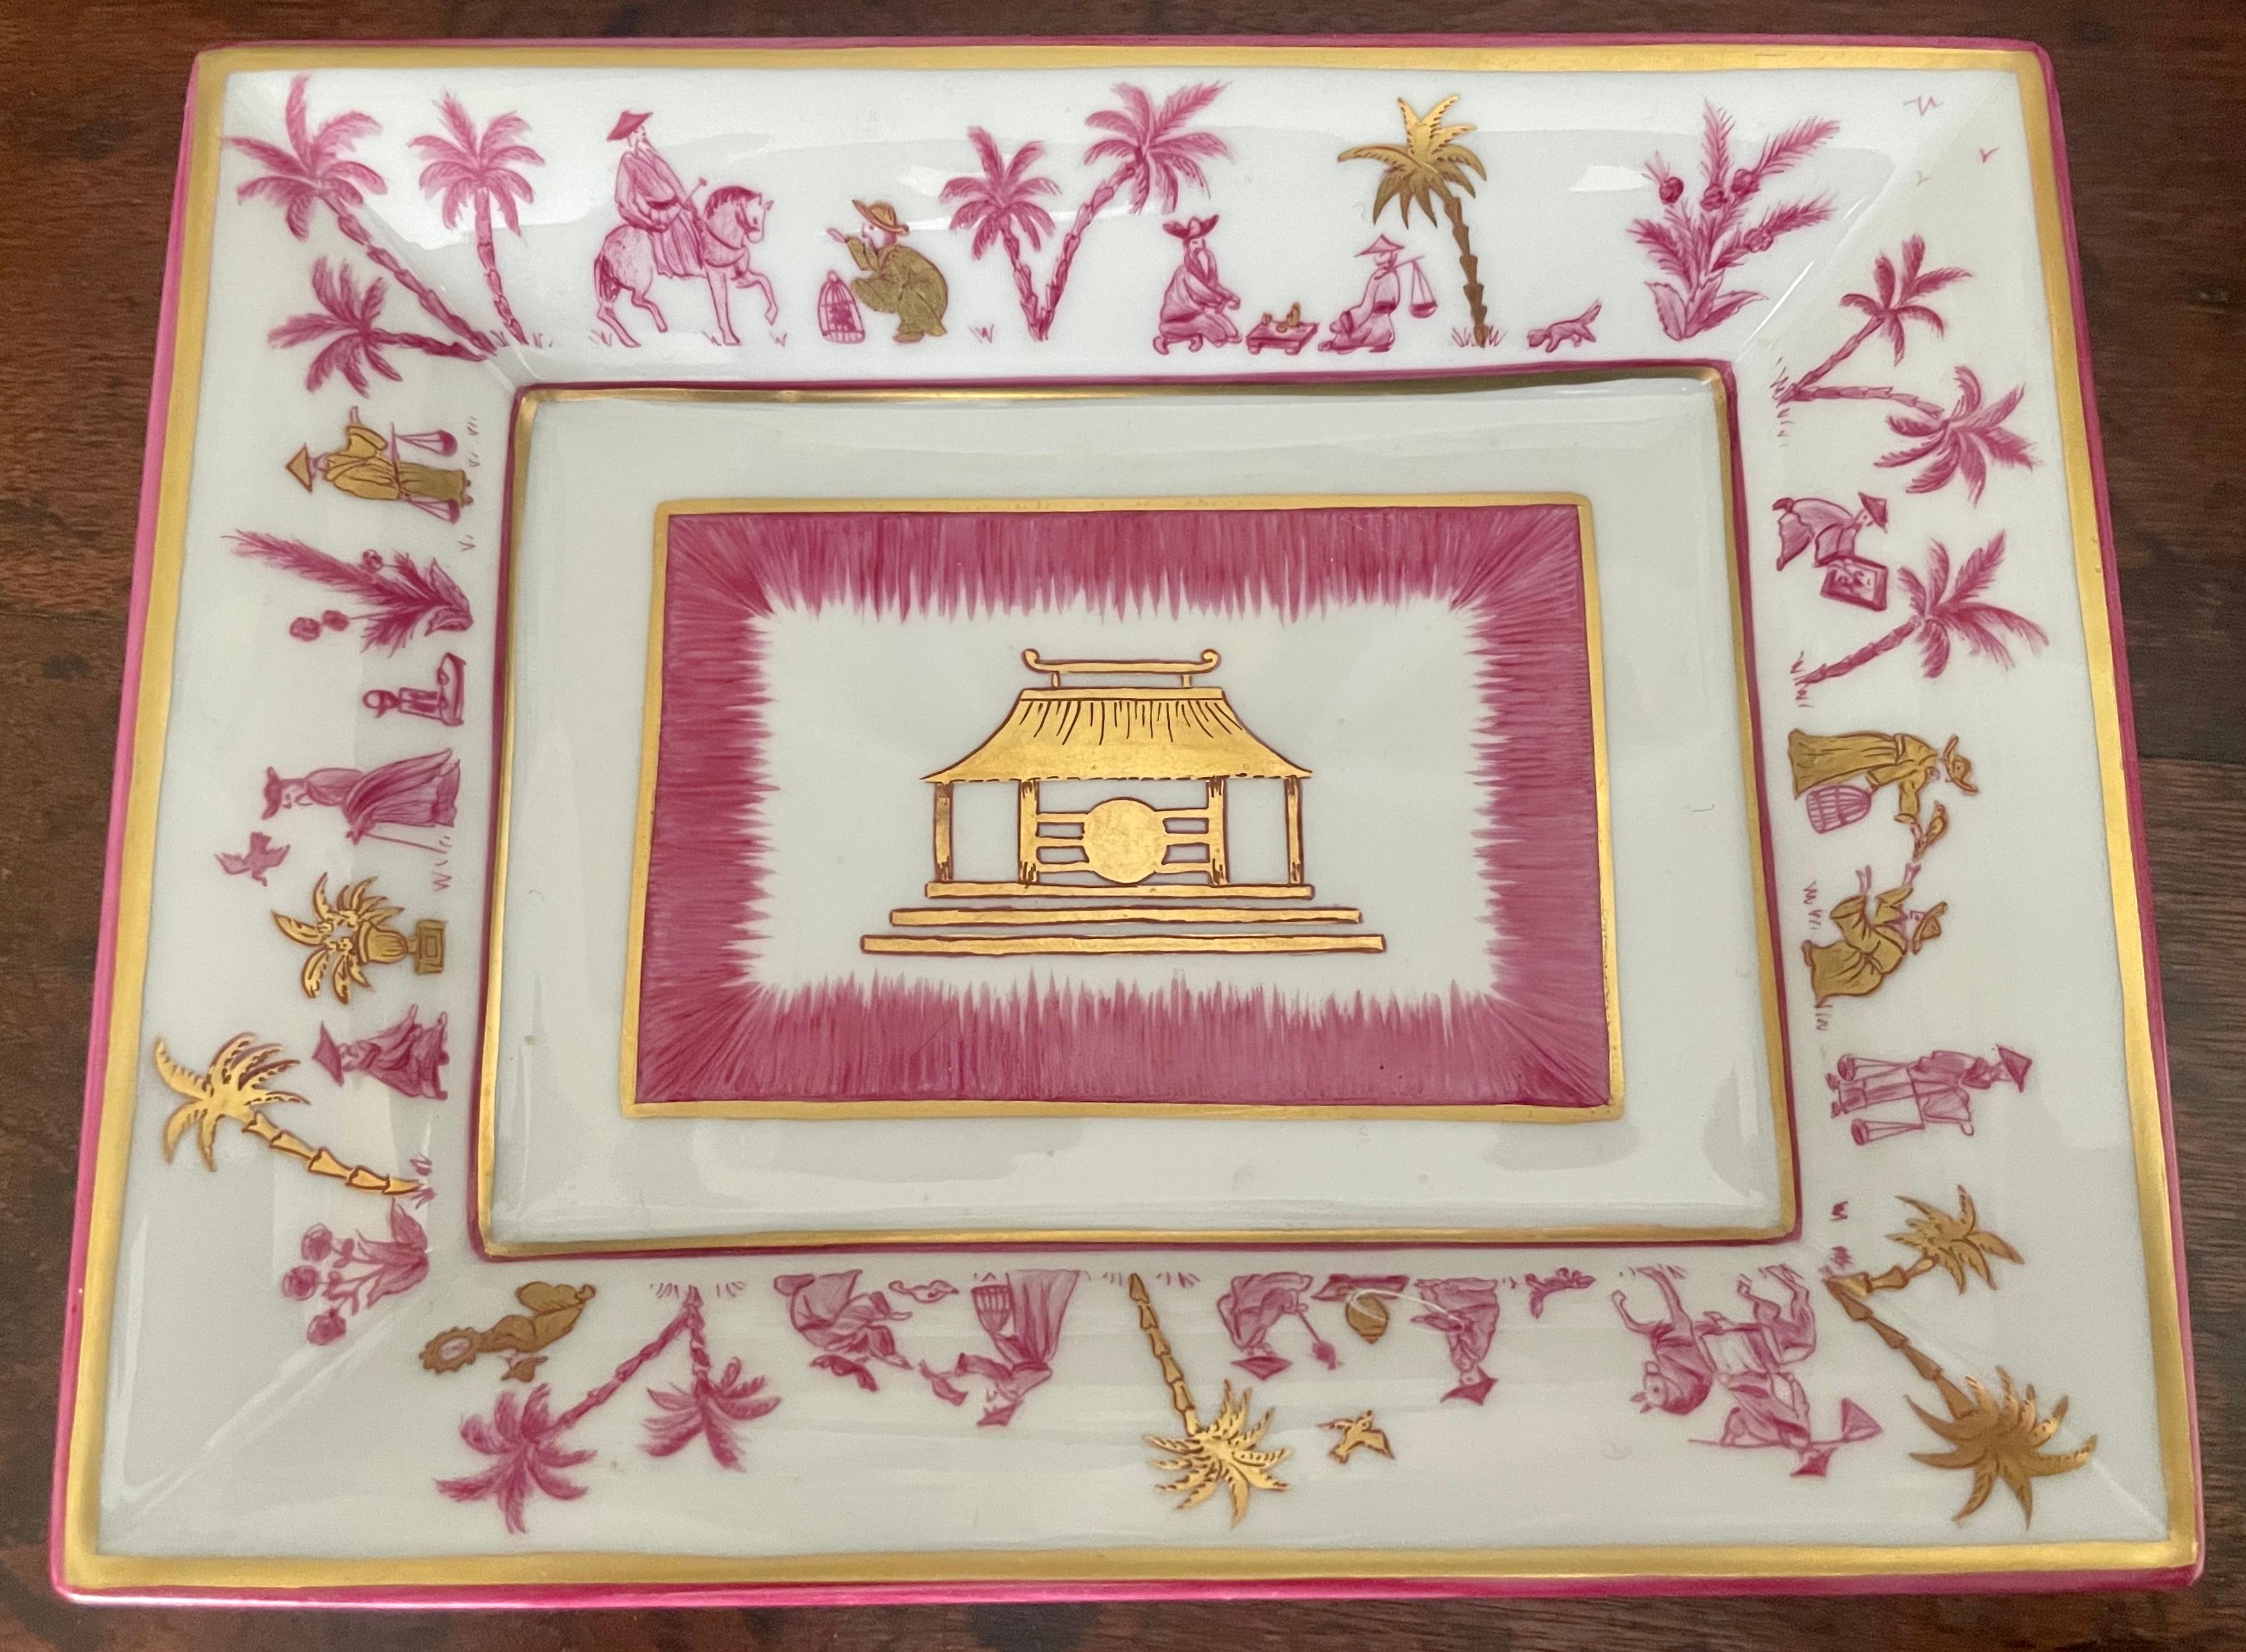 Pink and gold Chinoiserie vide-poche. French porcelain raspberry pink and gold painted ashtray with central gold pagoda pavilion with raised out curving pink and gold banded border with palm trees and chinoiserie figures; stamped Limoges. France,